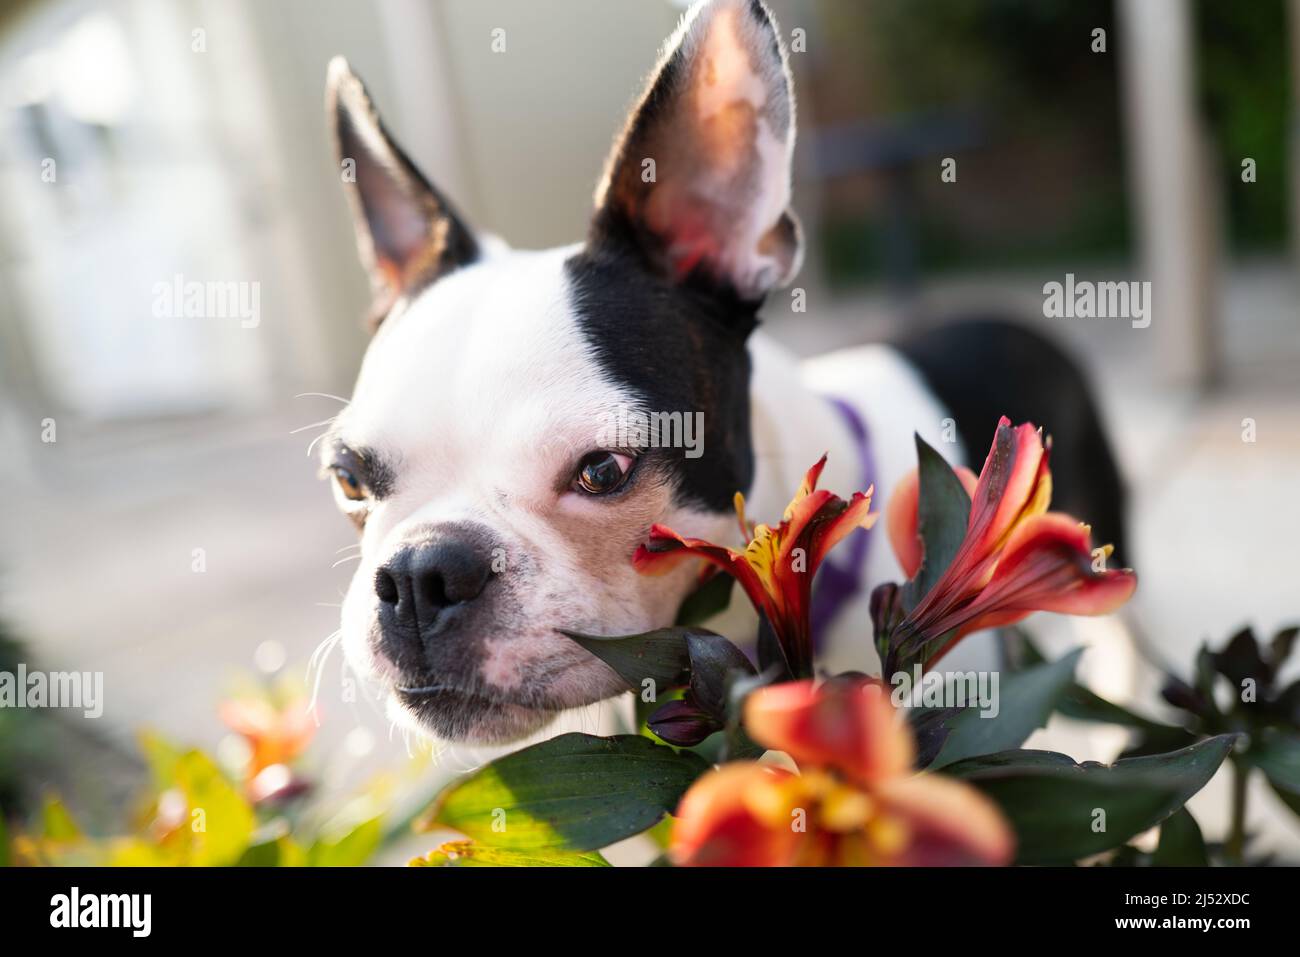 Portrait of a young Boston Terrier dog standing by orange peruvian lily flowers. Stock Photo